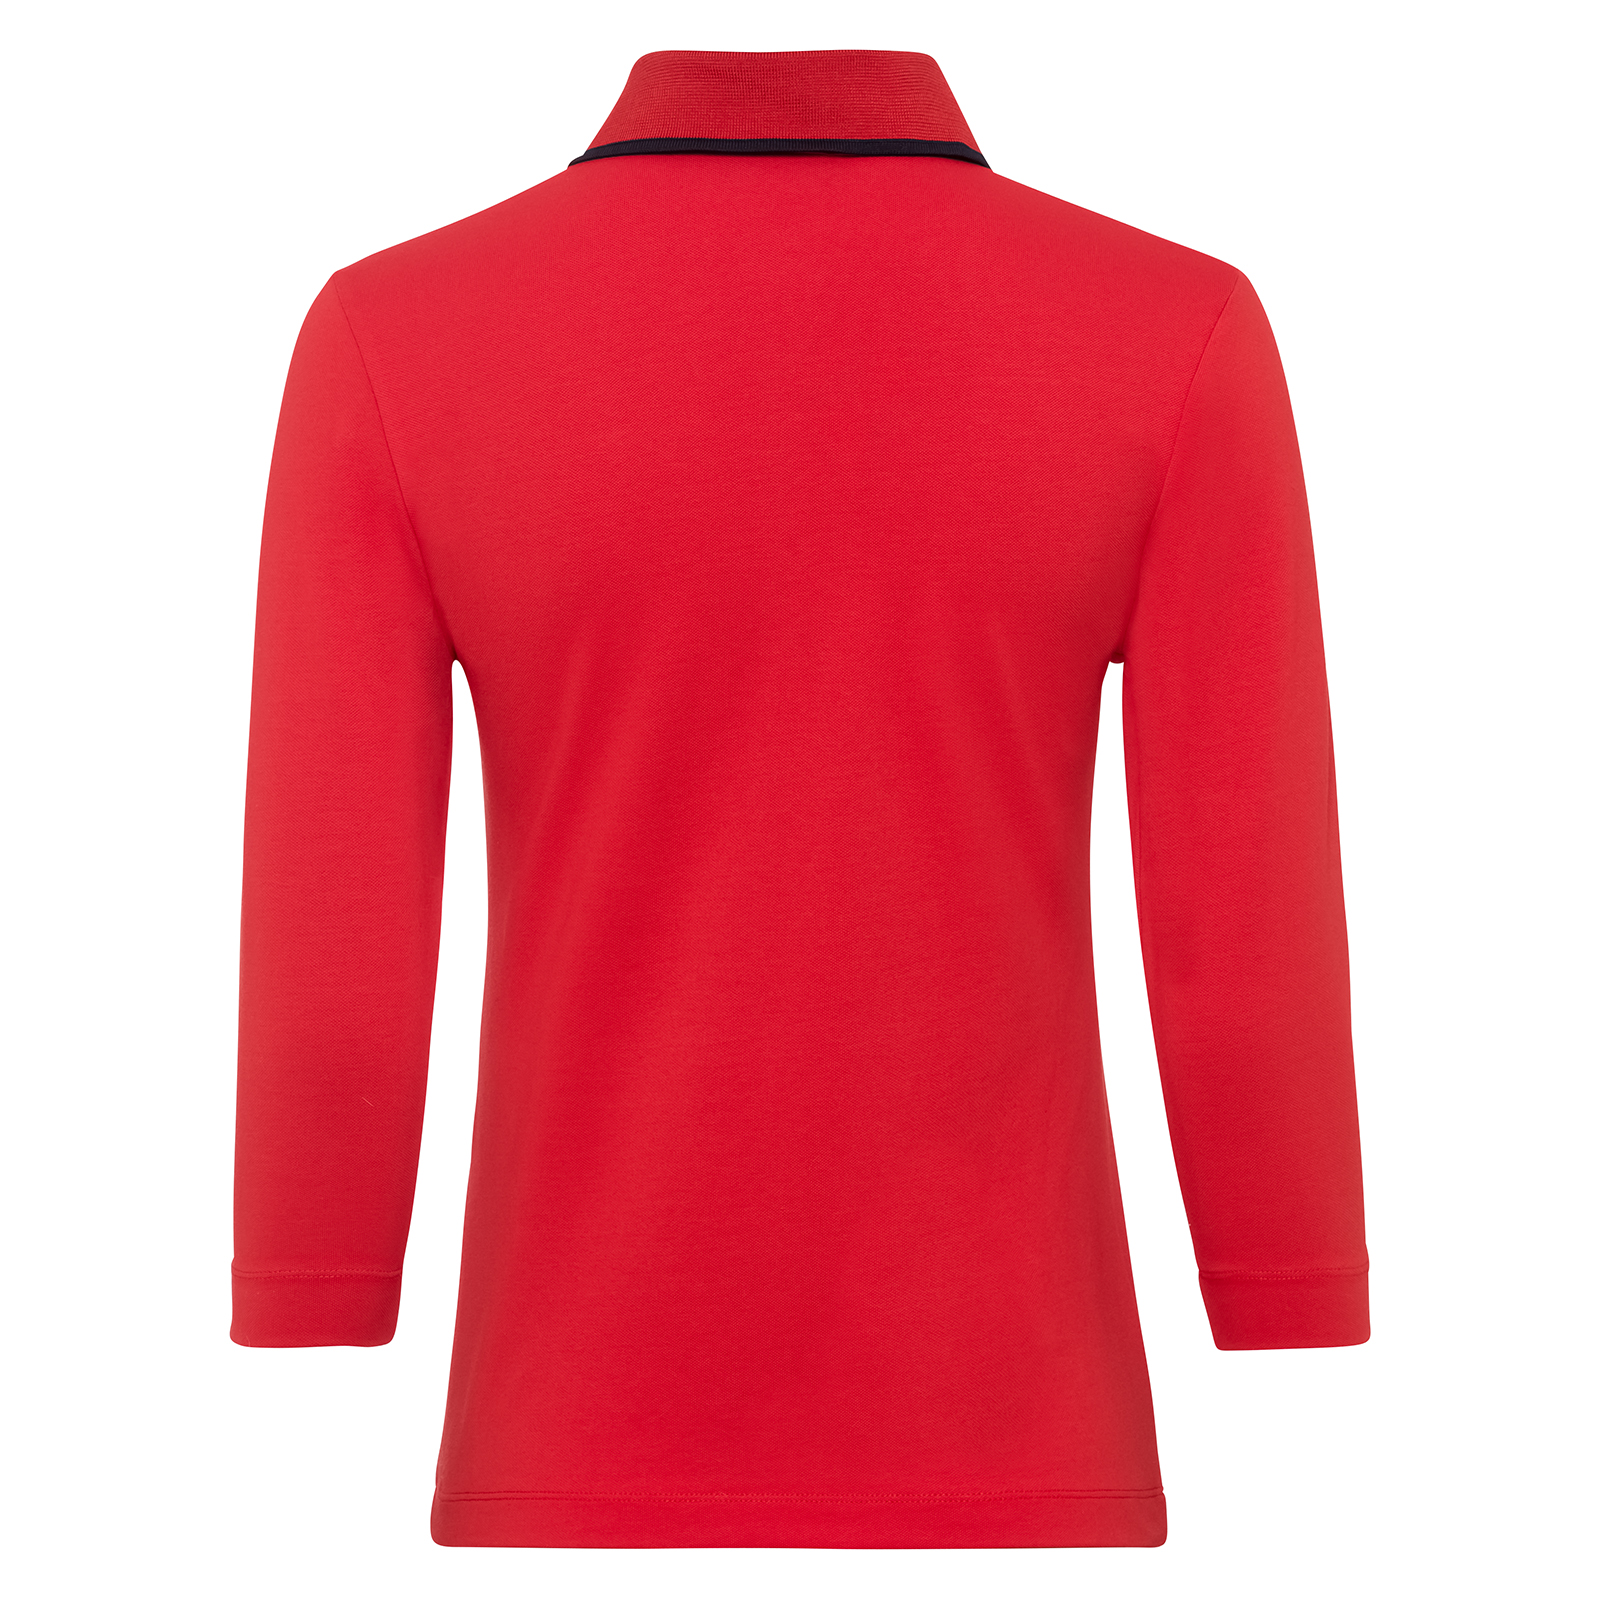 Ladies' golf polo shirt with ultraviolet protection factor